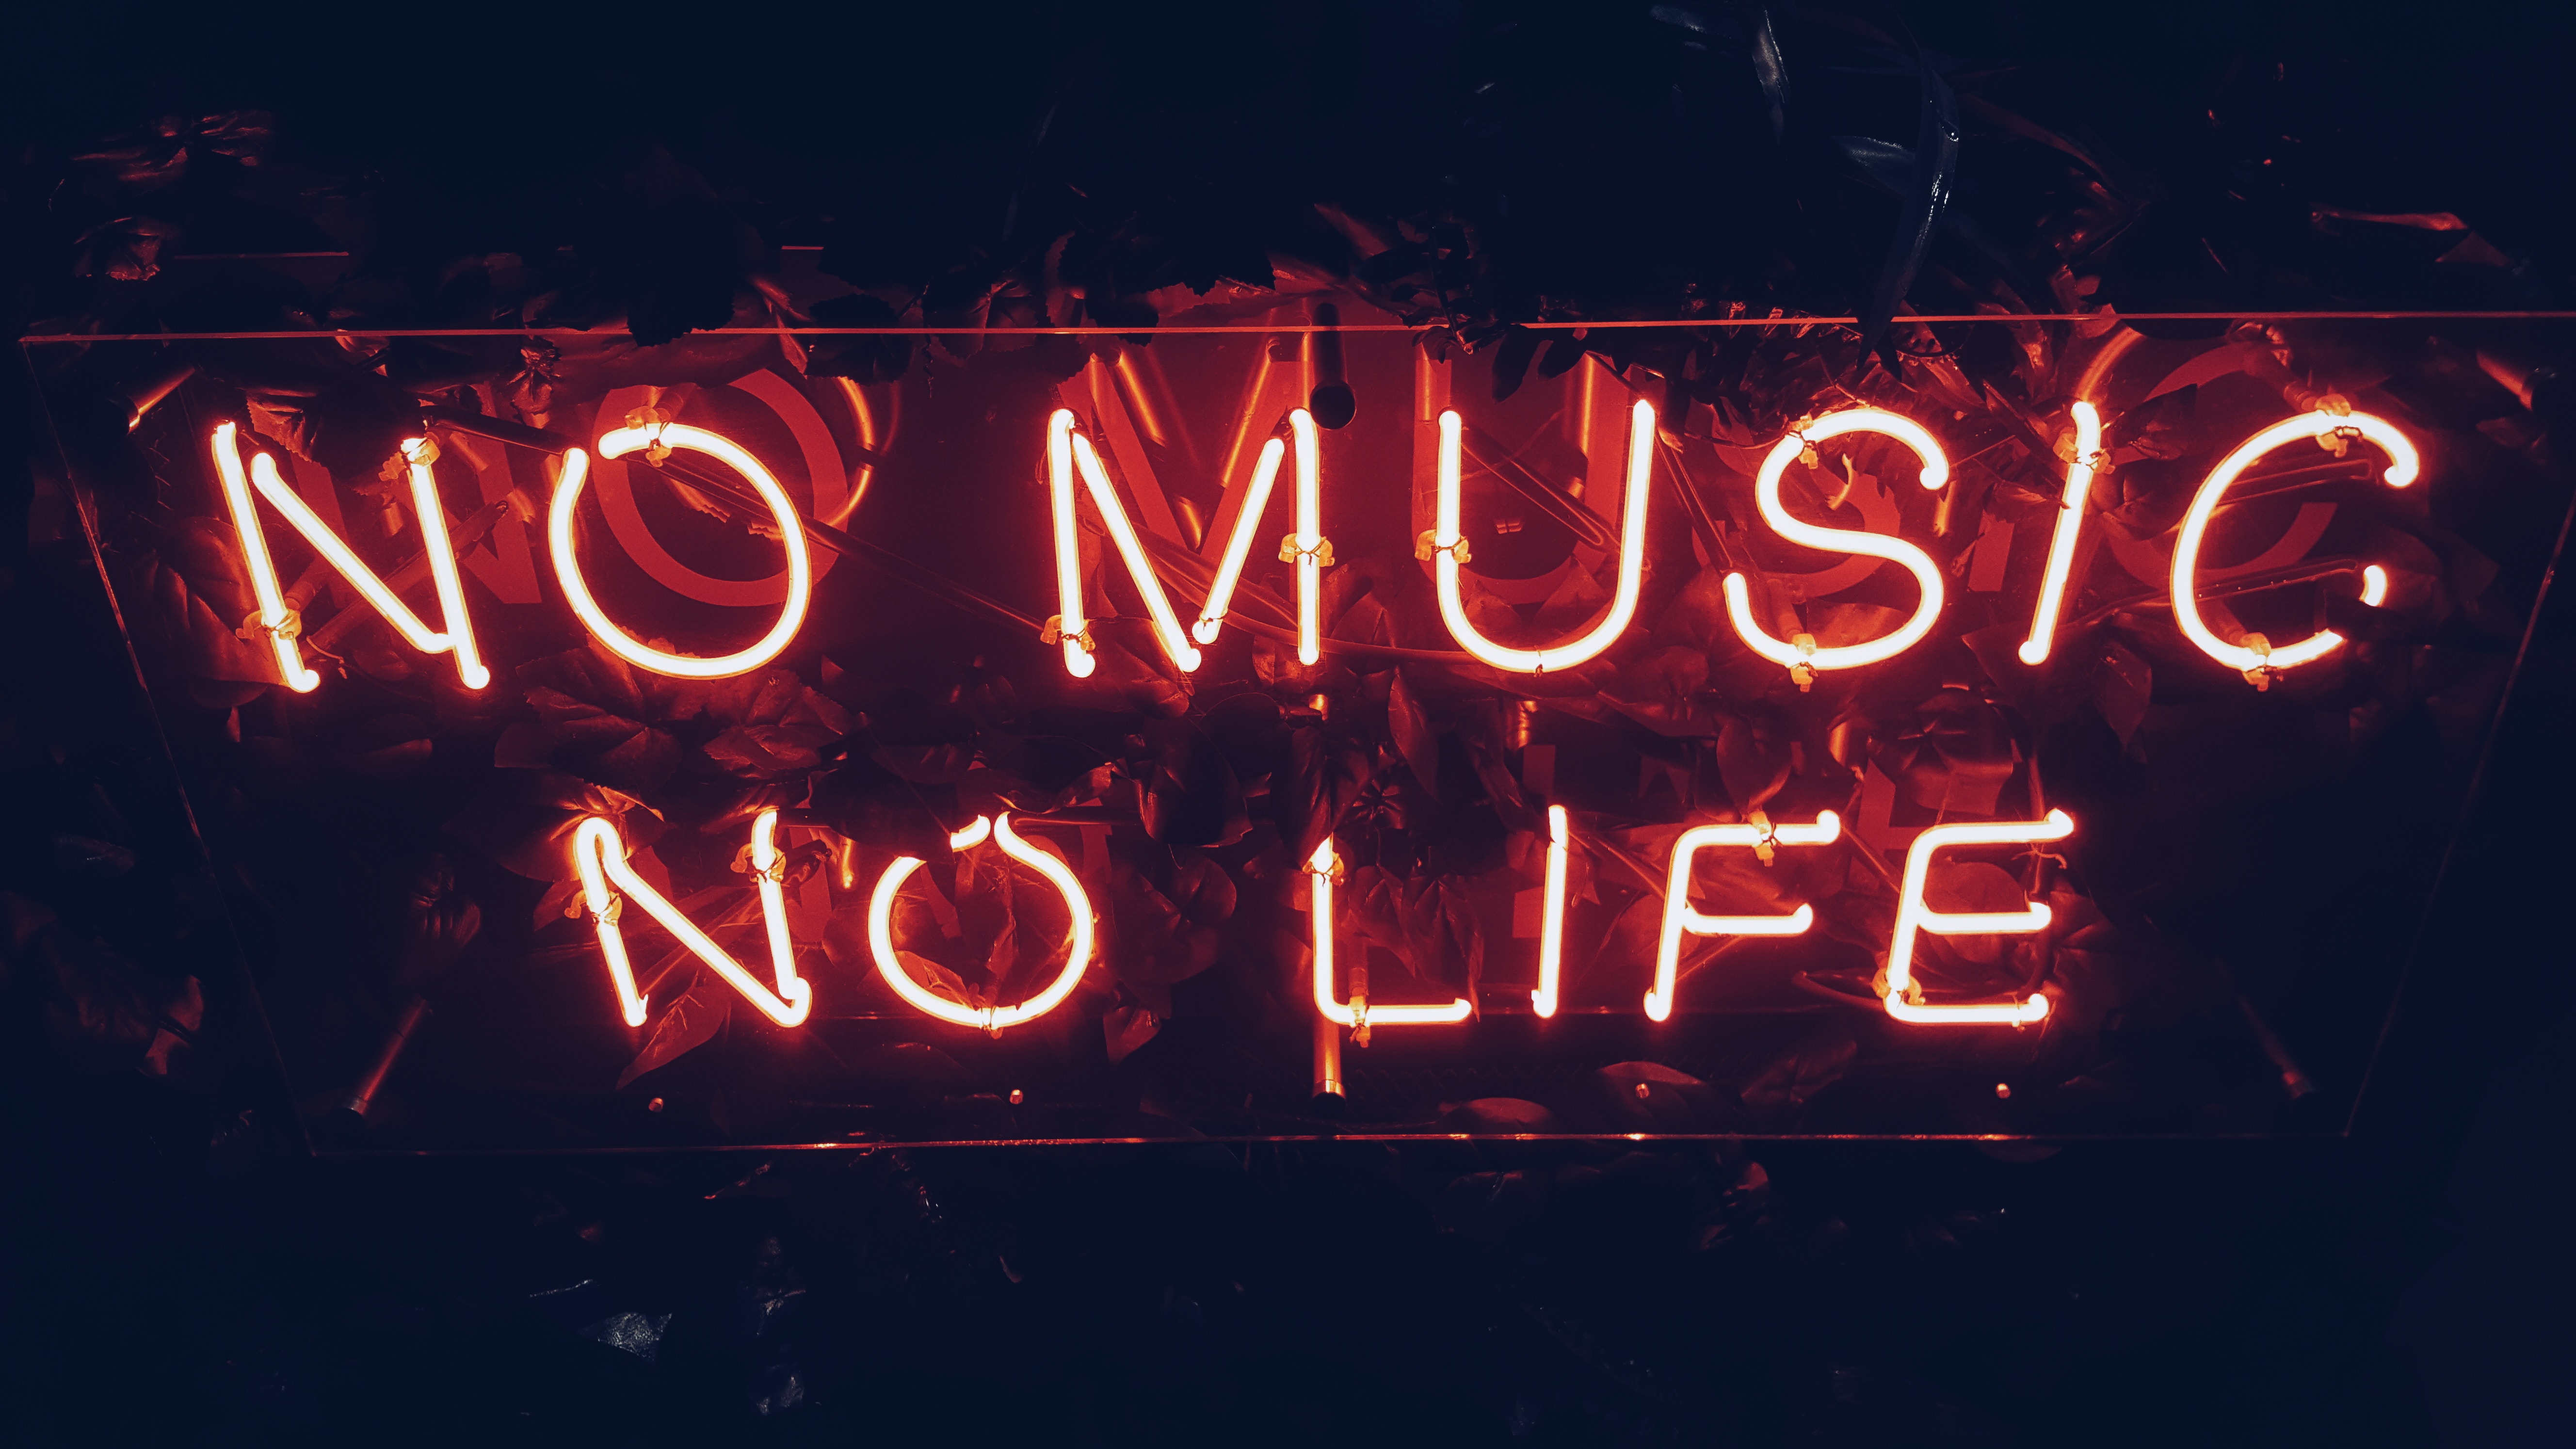 5312x2988 #neon art, #art, #music, #typography, #quote, #redlight, #lounge, #red, #music background, #Free picture, #no music no life, #illuminated, #neon sign, #life, #neonrart, #music wallpaper, #neon, #pub, #sign, #glow, #wallpaper